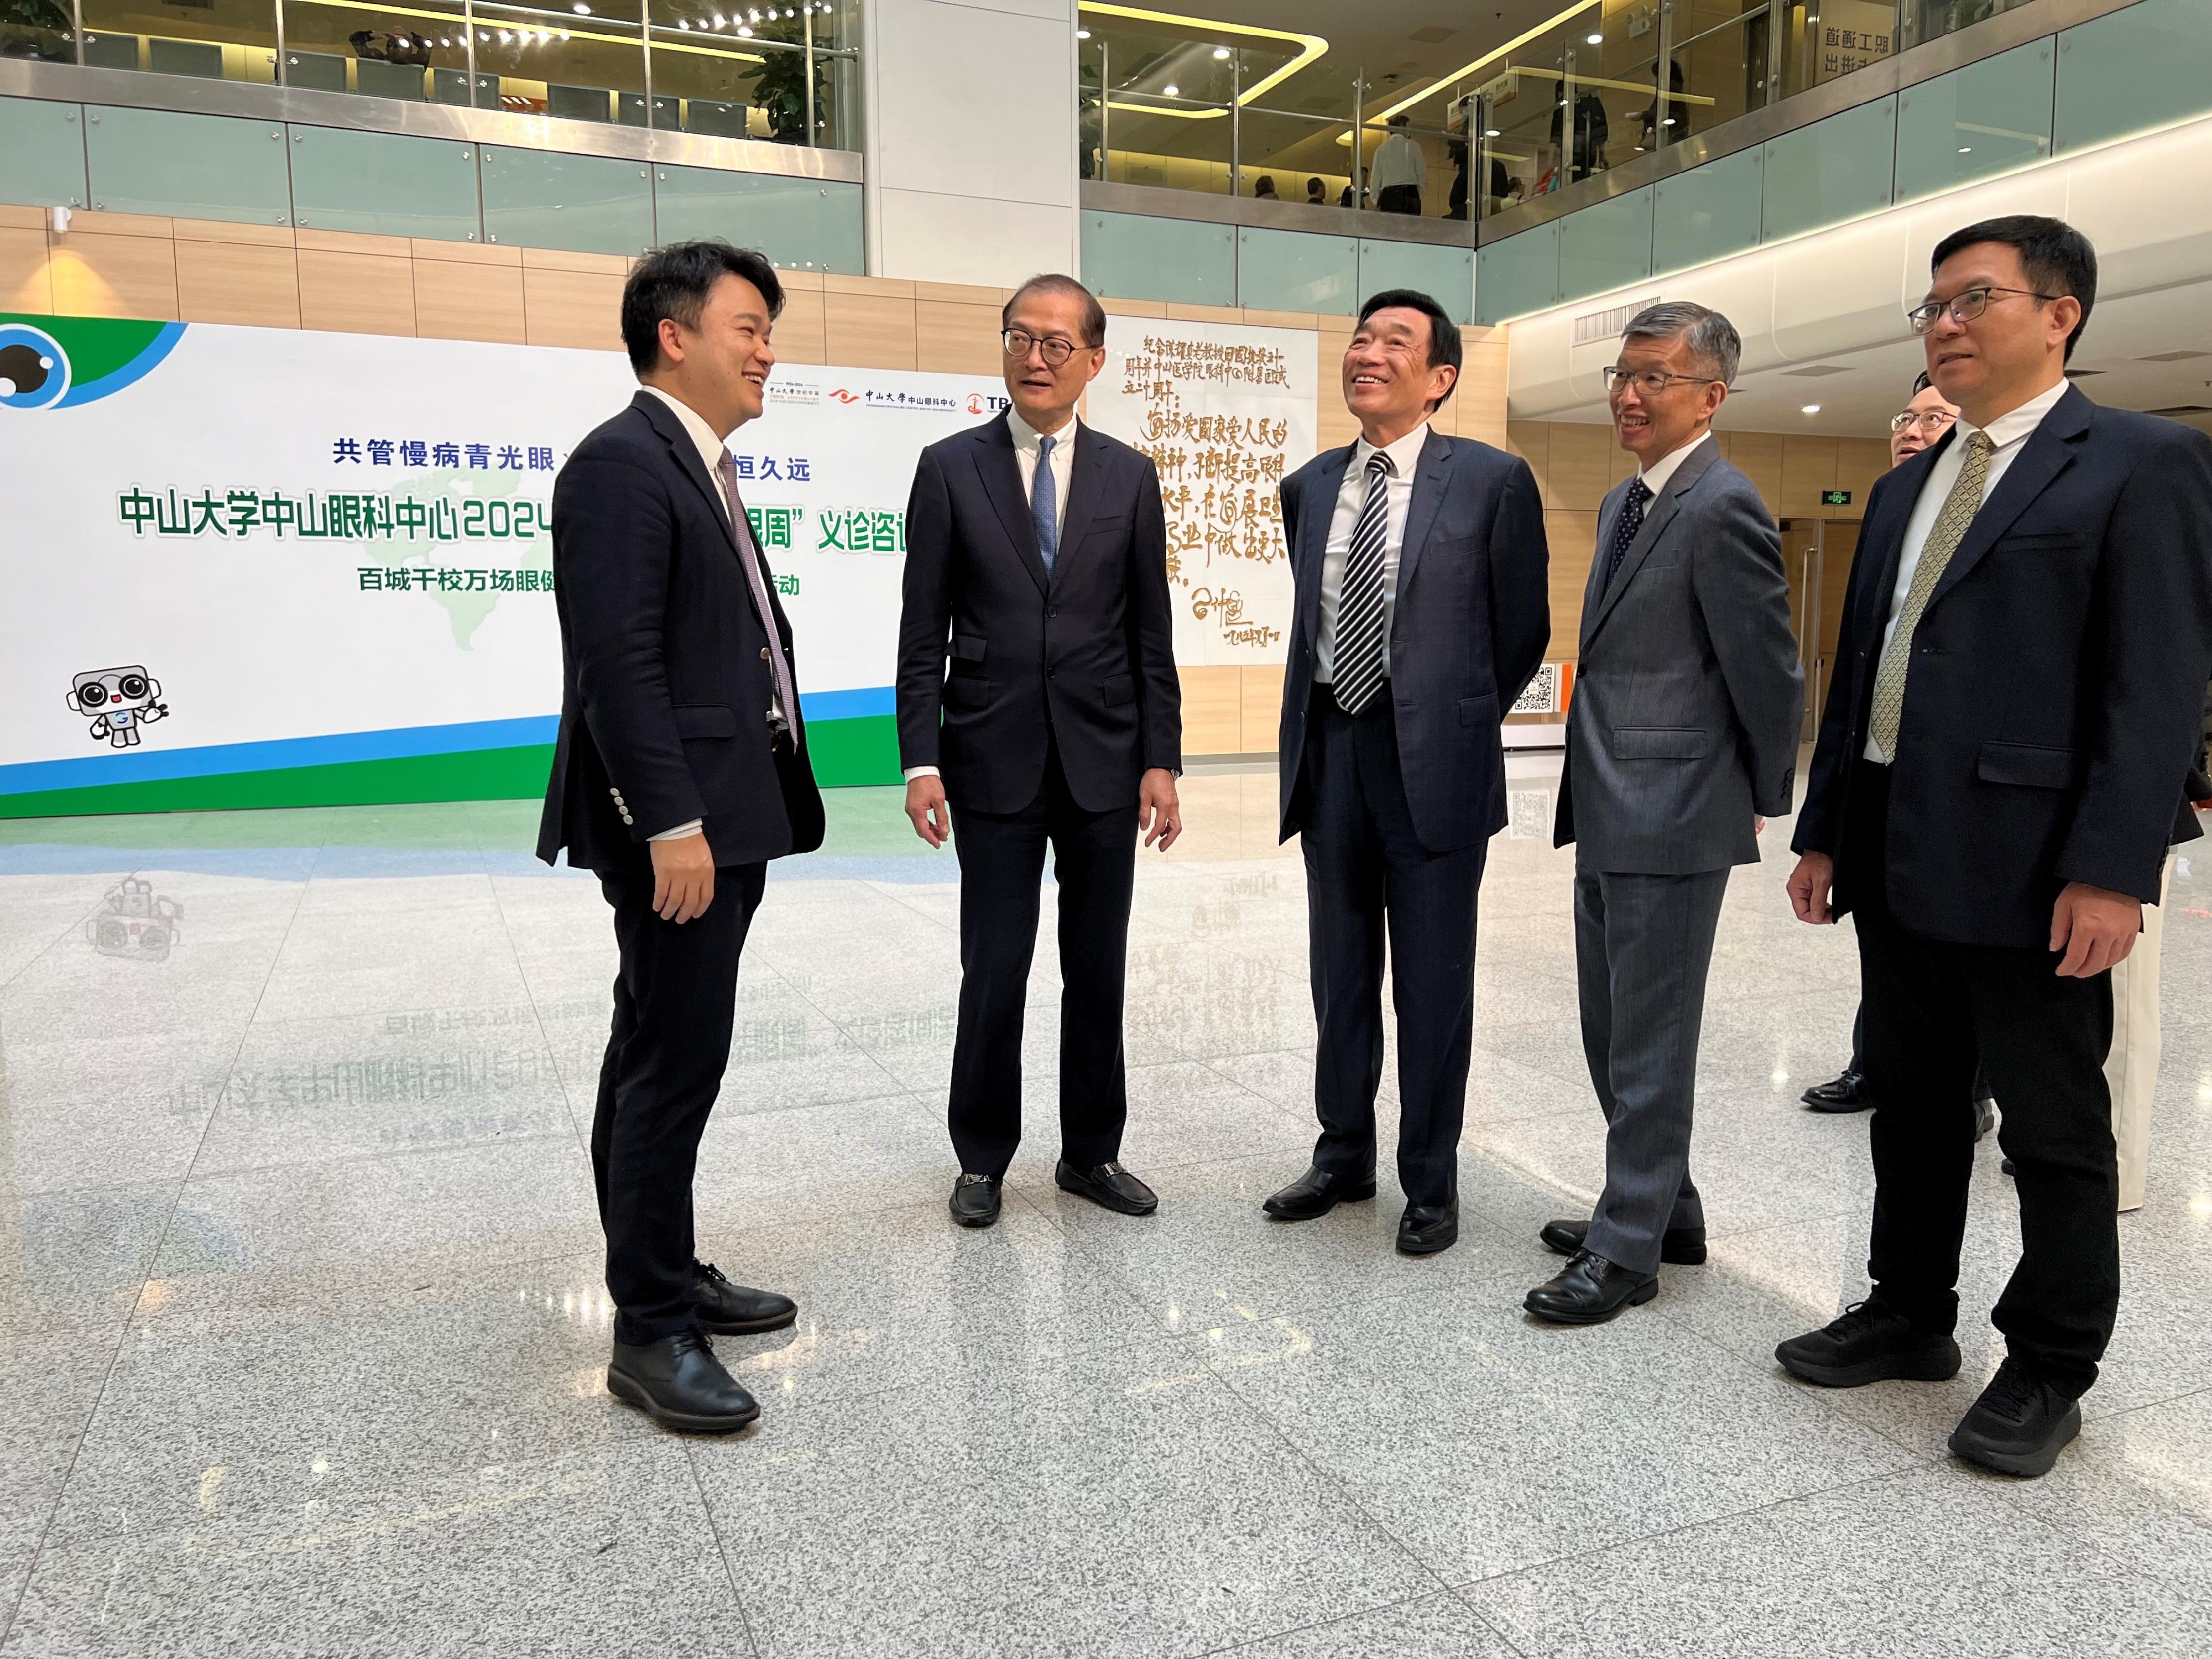 ​The Secretary for Health, Professor Lo Chung-mau, and his delegation visited the Zhongshan Ophthalmic Center of Sun Yat-sen University in Guangzhou today (March 13). Photo shows Professor Lo (second left); the Chairman of the Hospital Authority (HA), Mr Henry Fan (third right); and the Deputising Chief Executive of the HA, Dr Simon Tang (second right), receiving a briefing by a representative of the Ophthalmic Center on the services provided there.